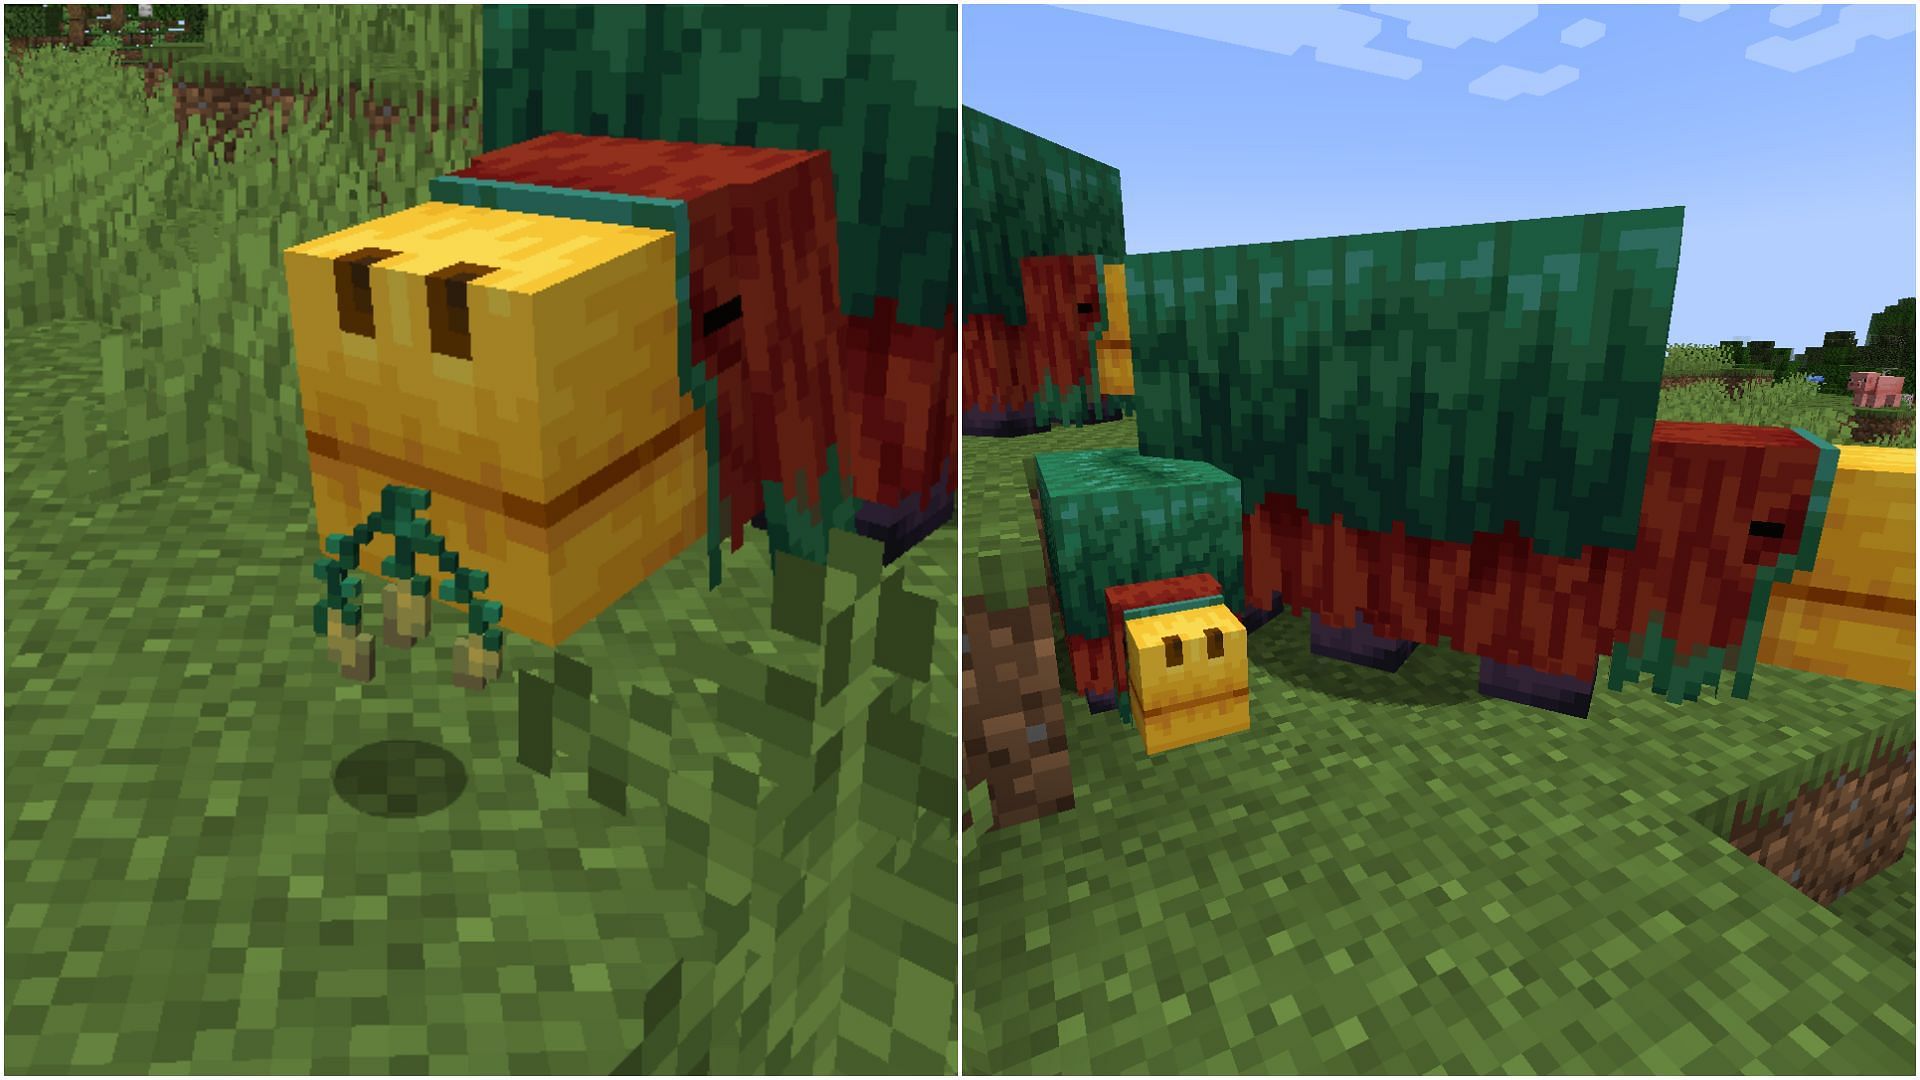 Sniffers can also breed in Minecraft 1.20 (Image via Sportskeeda)